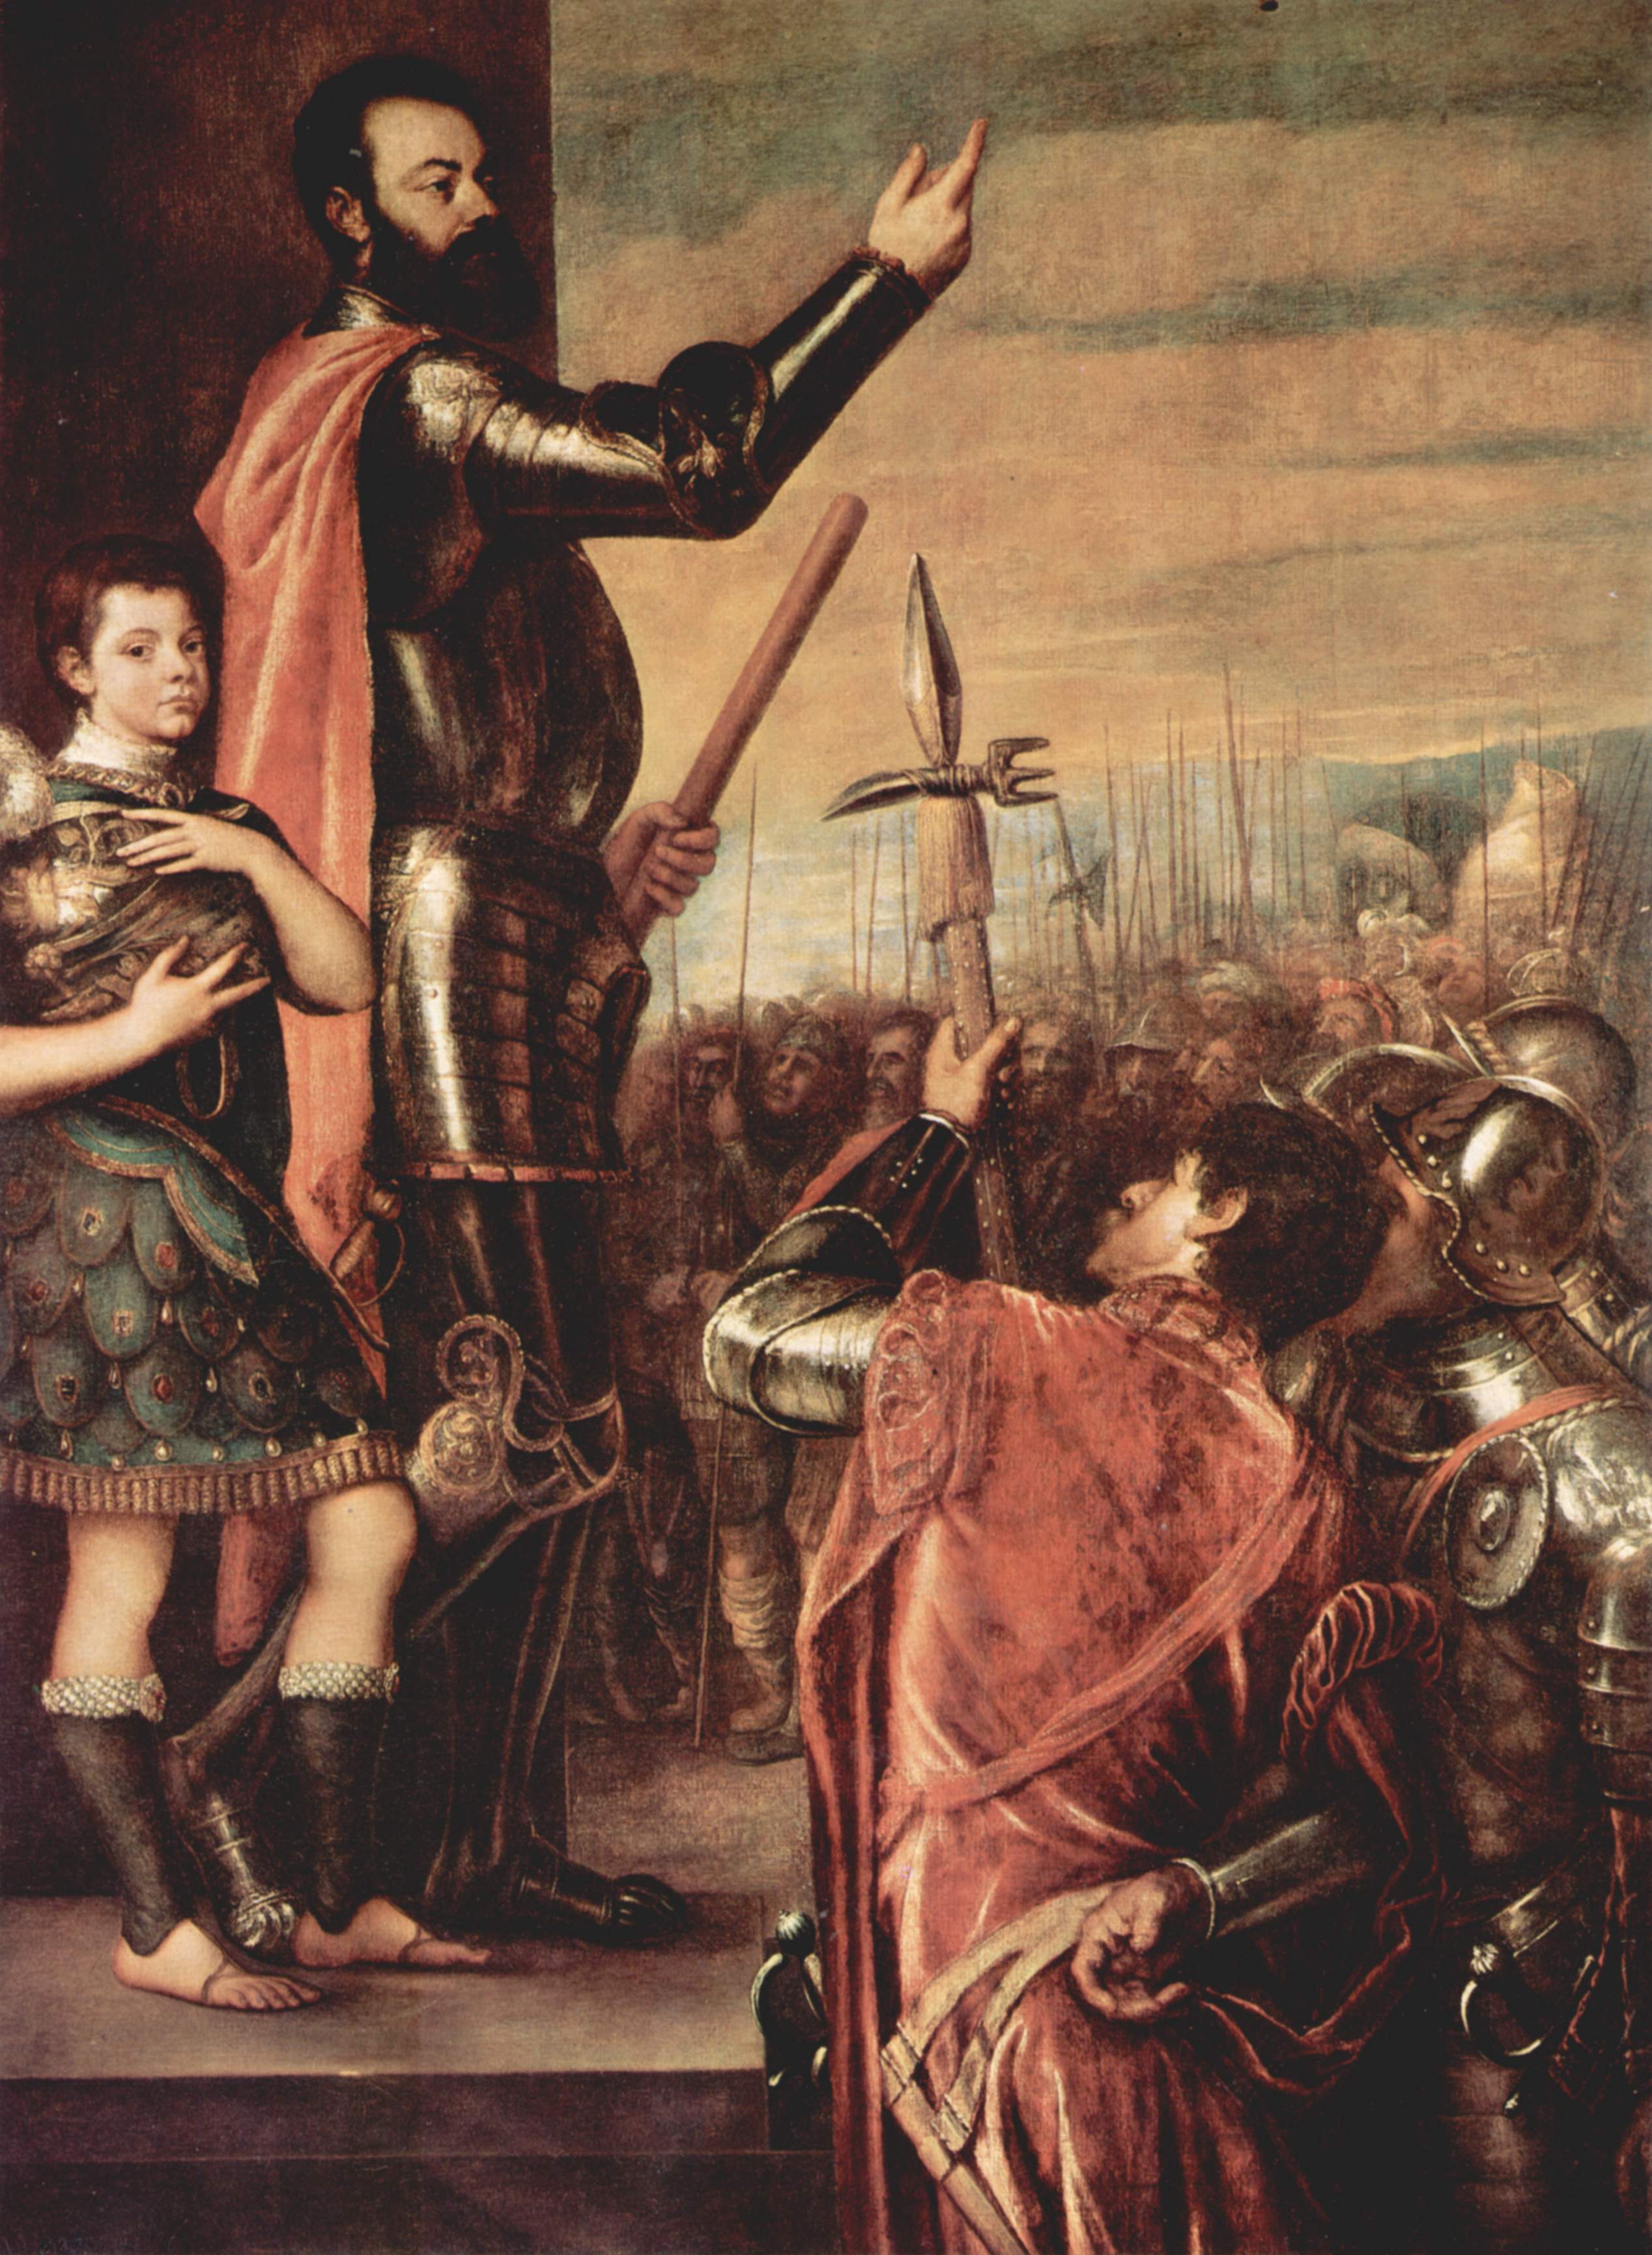 https://uploads8.wikiart.org/images/titian/the-marchese-del-vasto-addressing-his-troops-1541.jpg